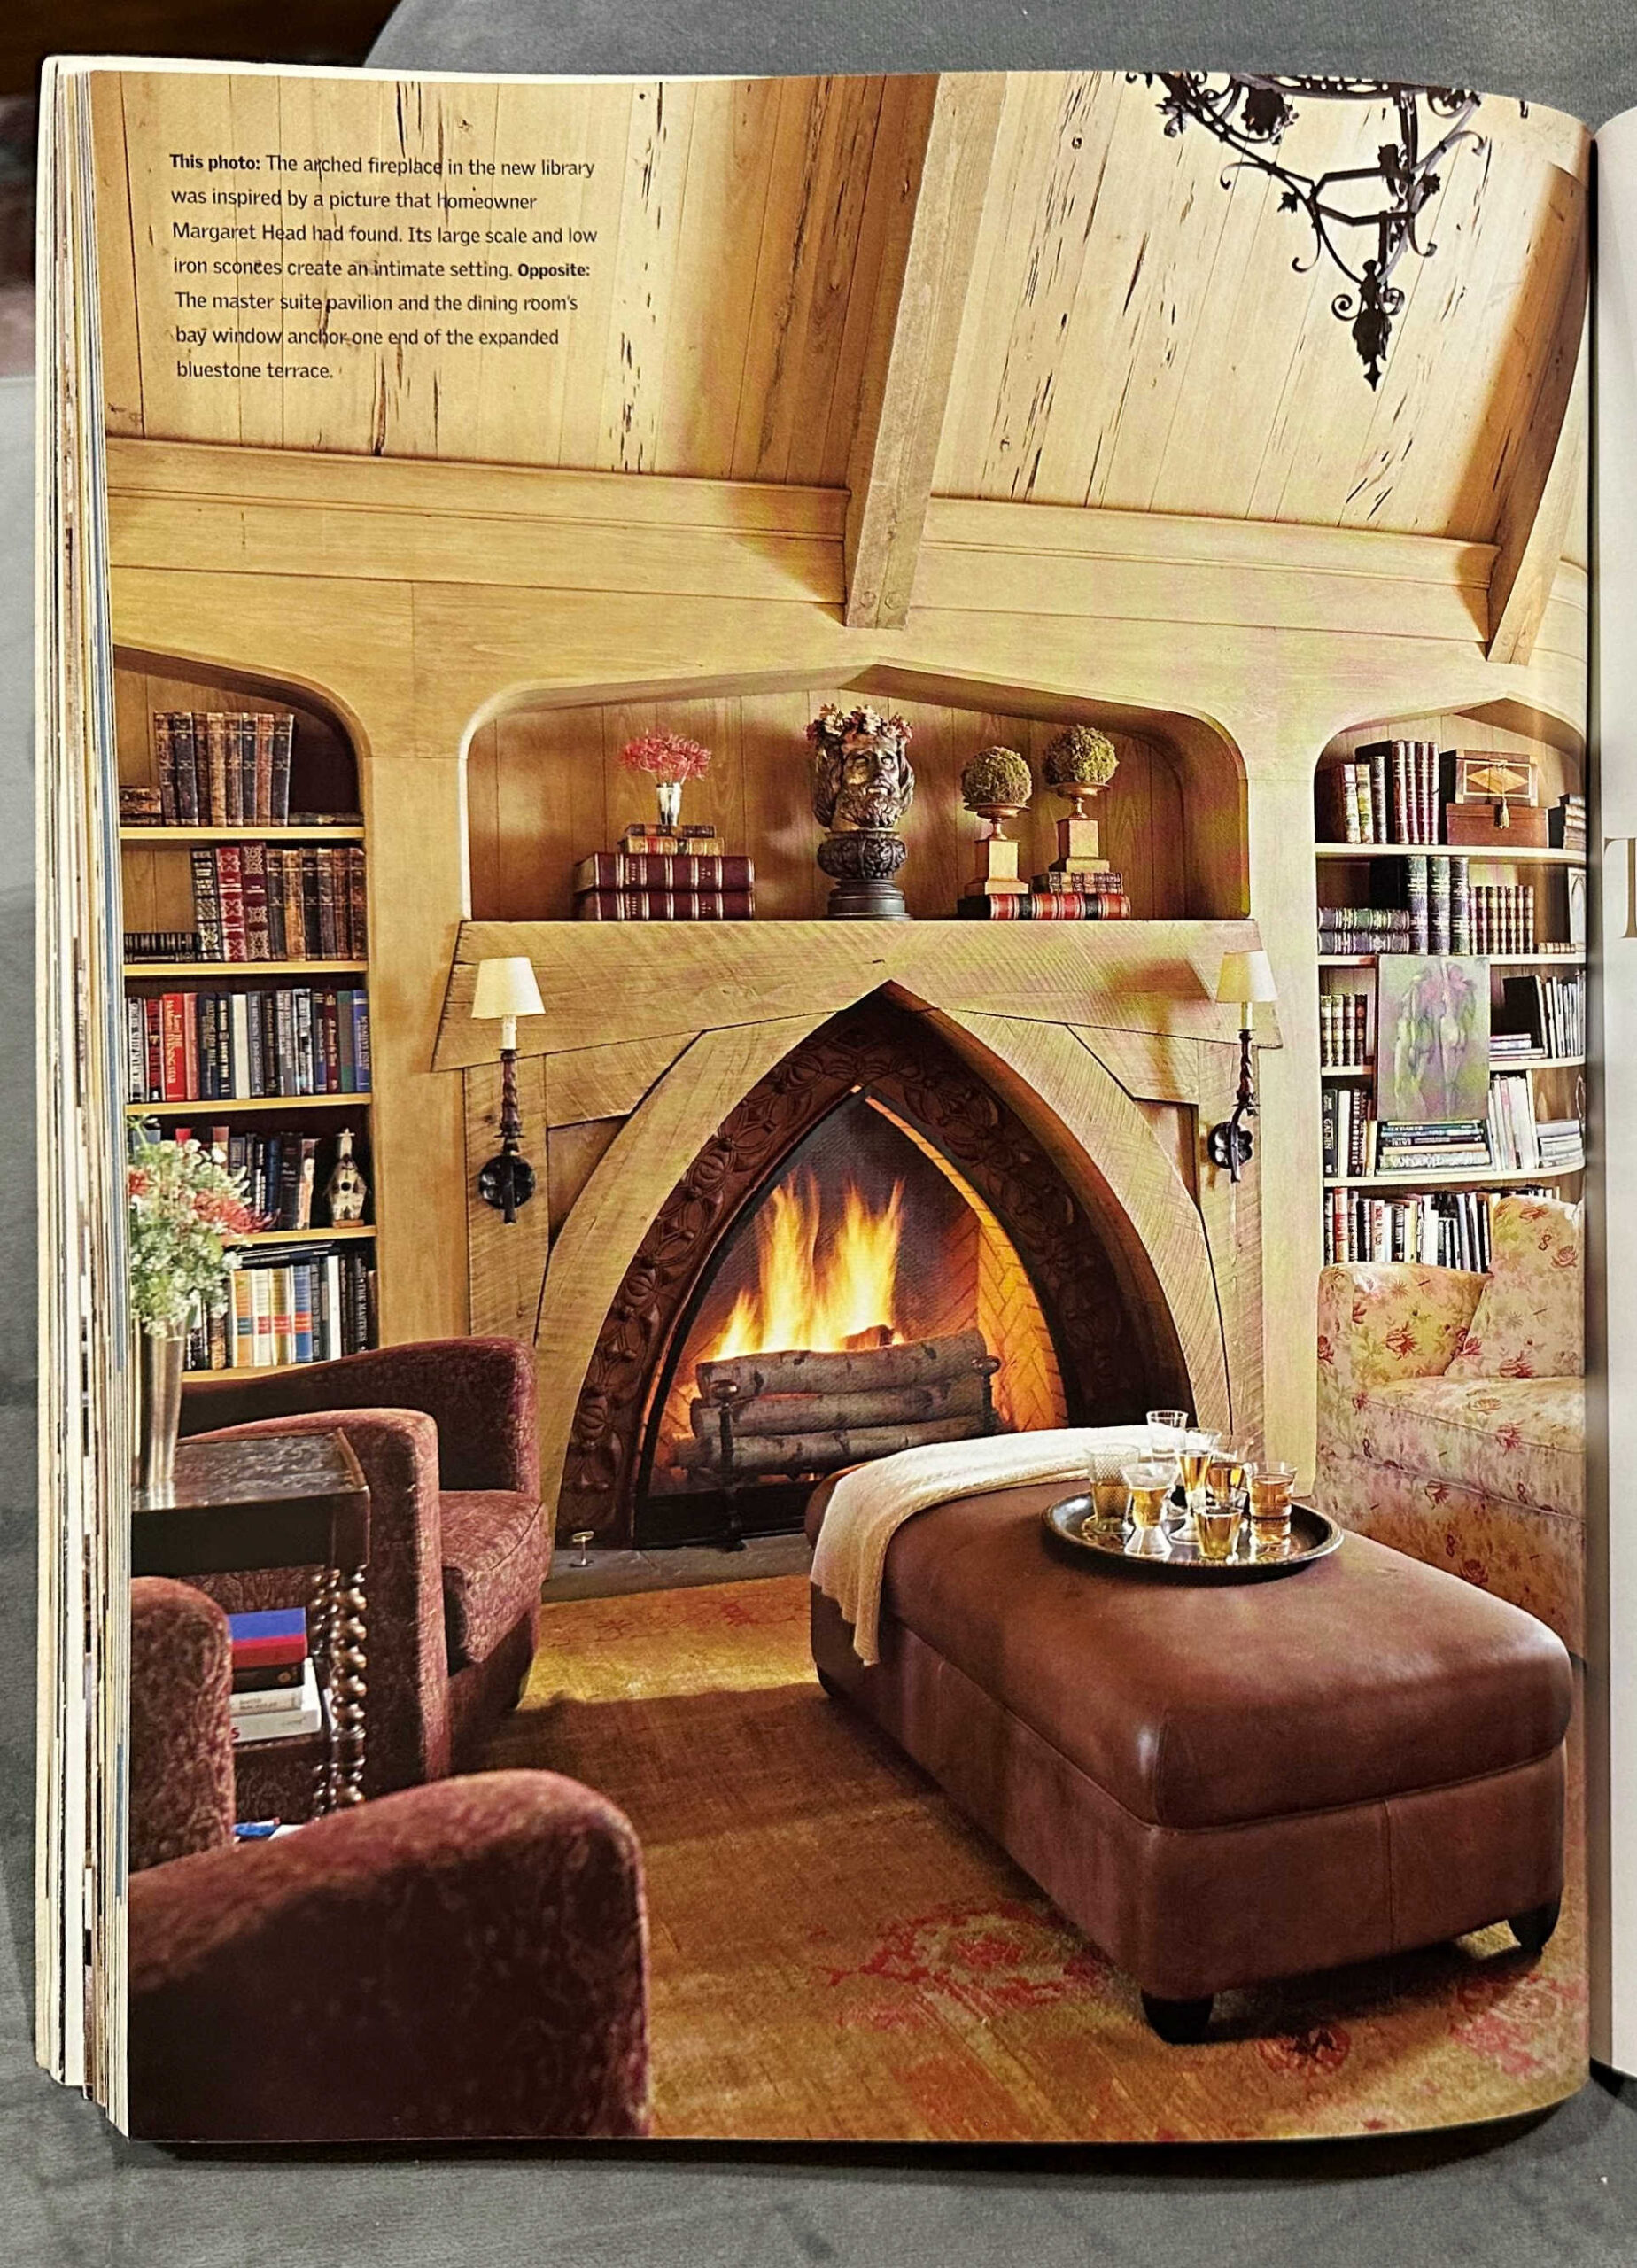 Unique cathedral window shaped fireplace in cottage style living room